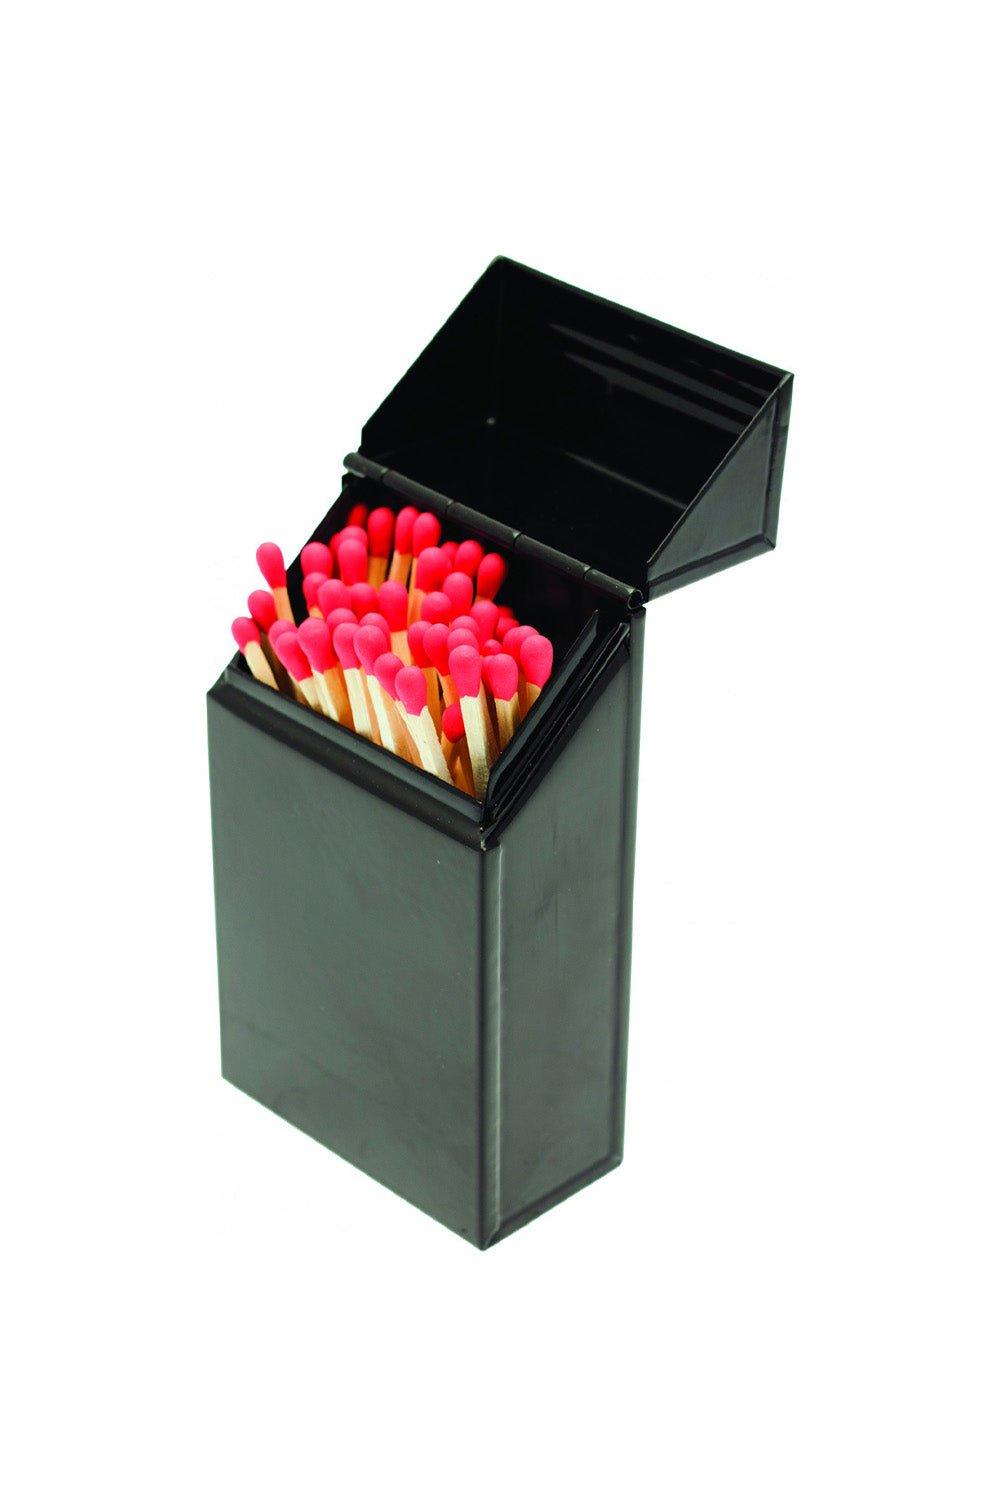 Valiant Match Storage Box - Metal Container with Flip Top Lid|black